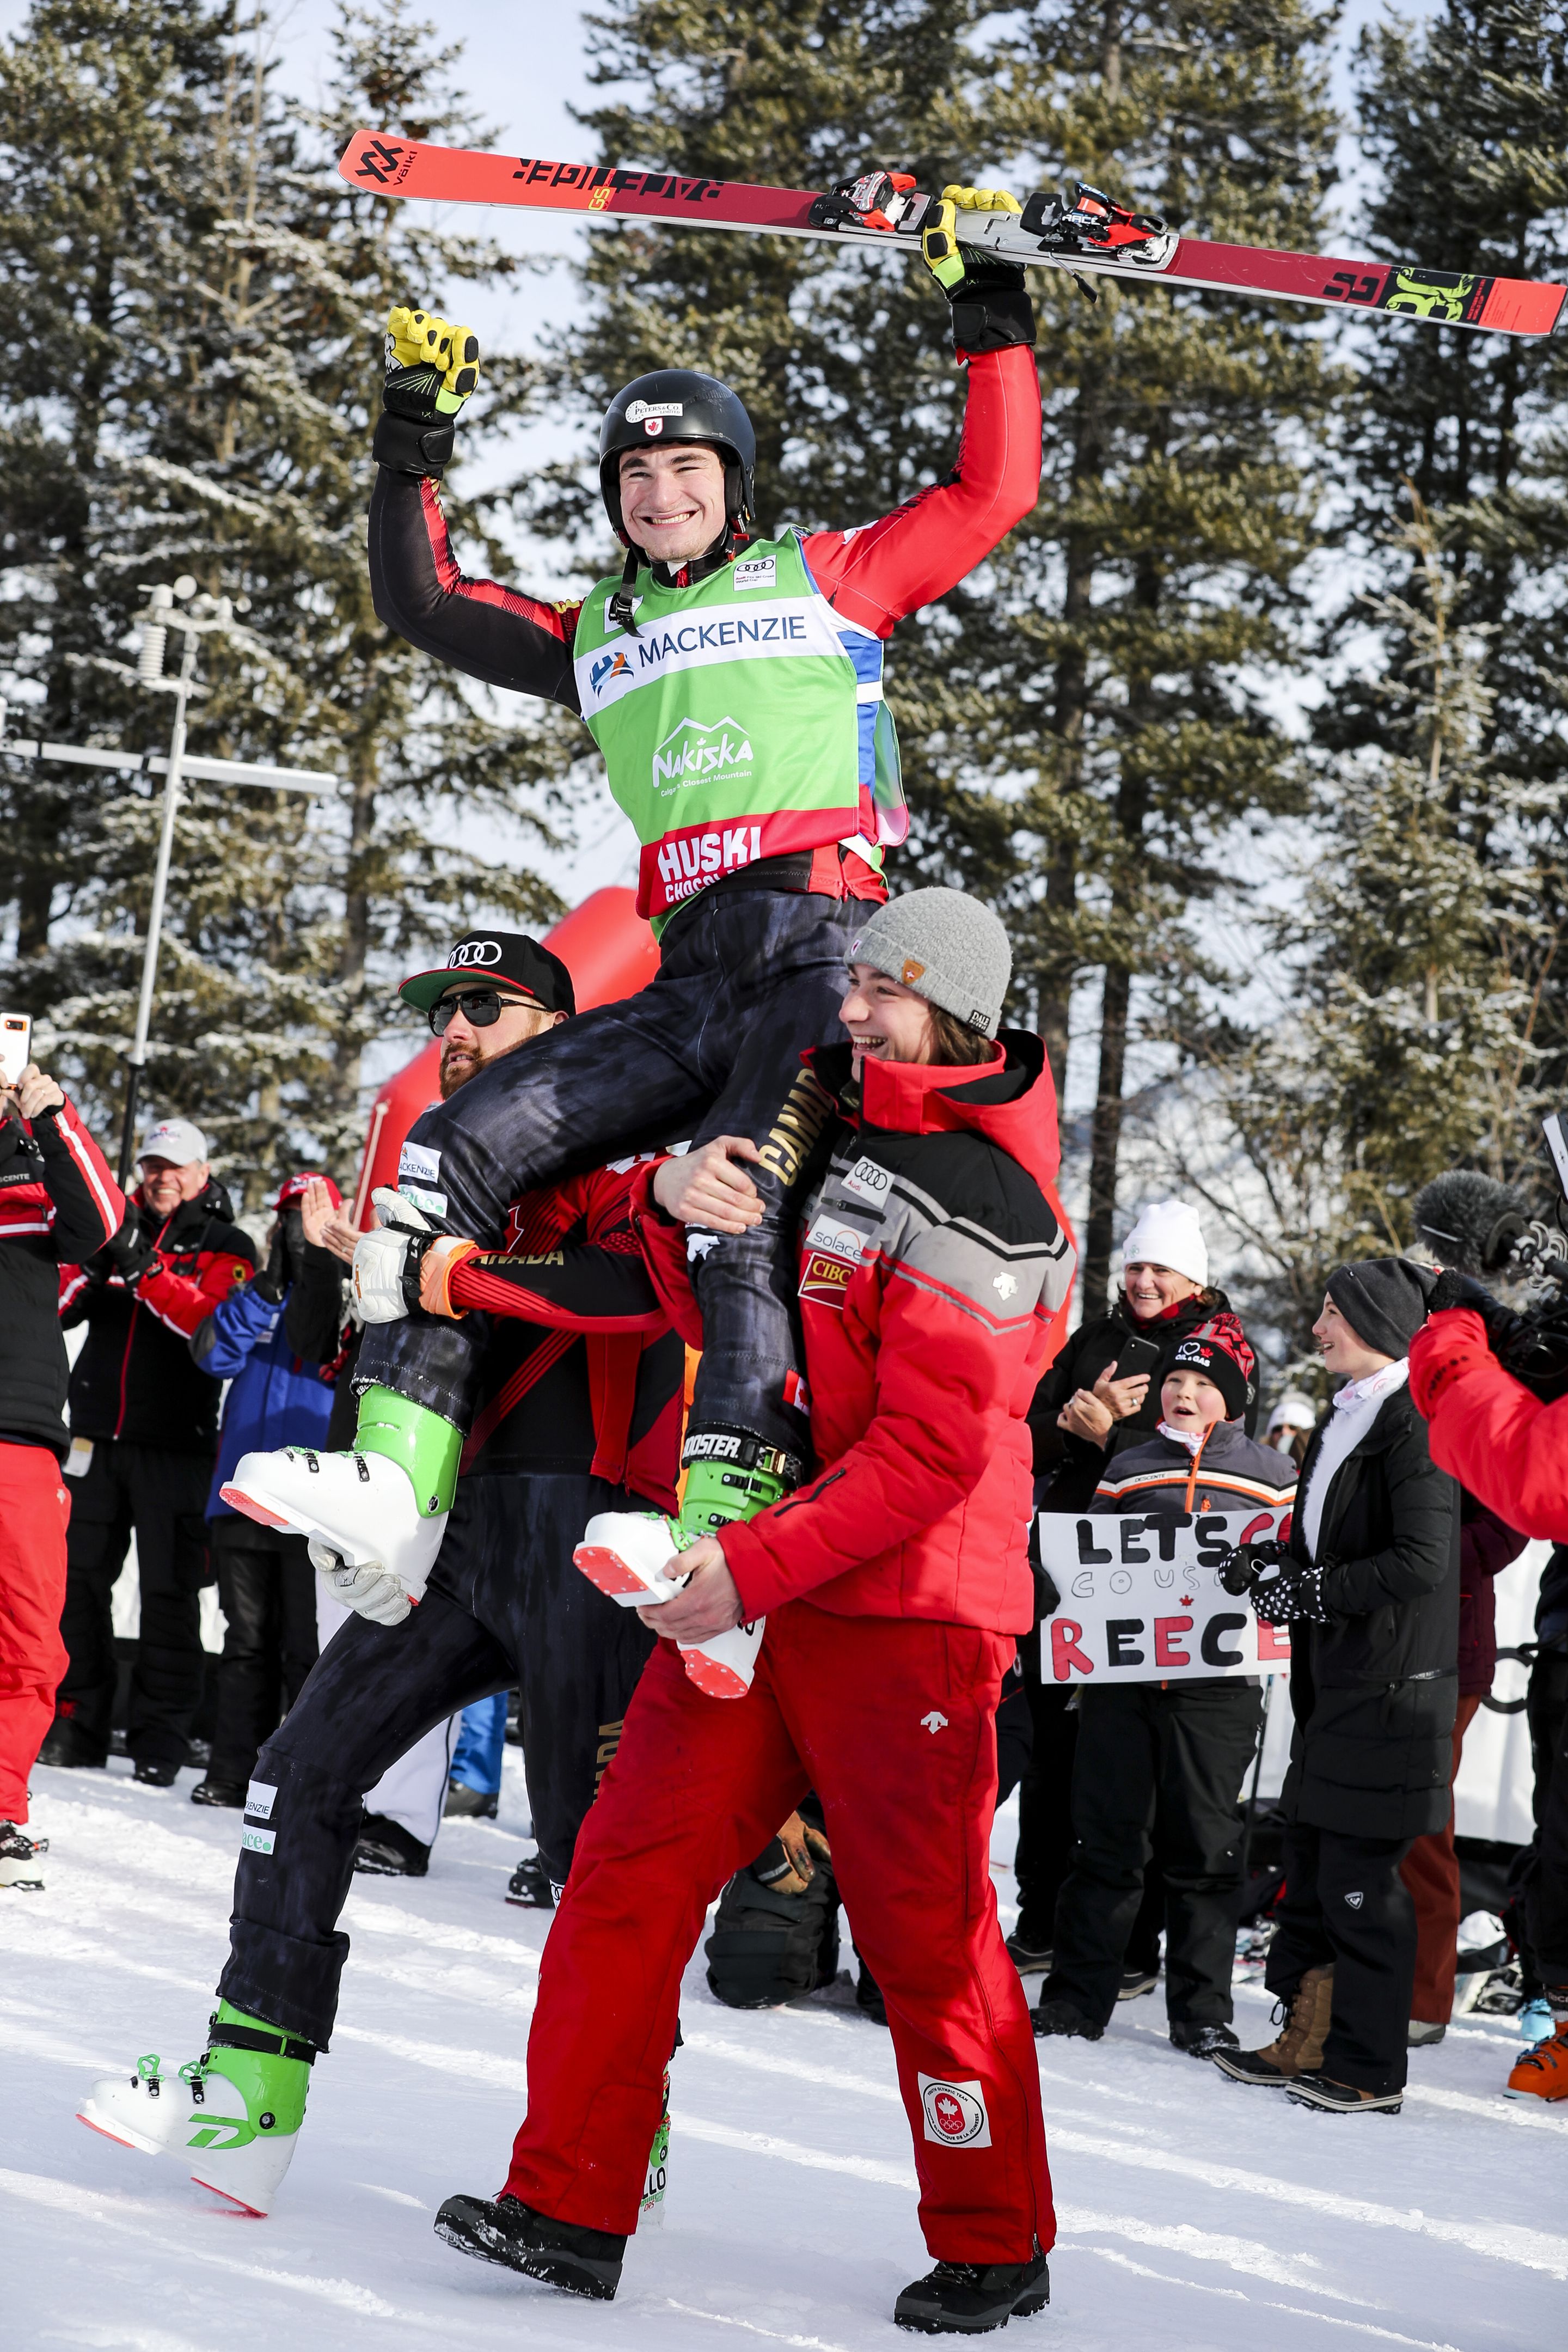 ©GEPA: Reece Howden (CAN) being carried to the podium by his team mates.